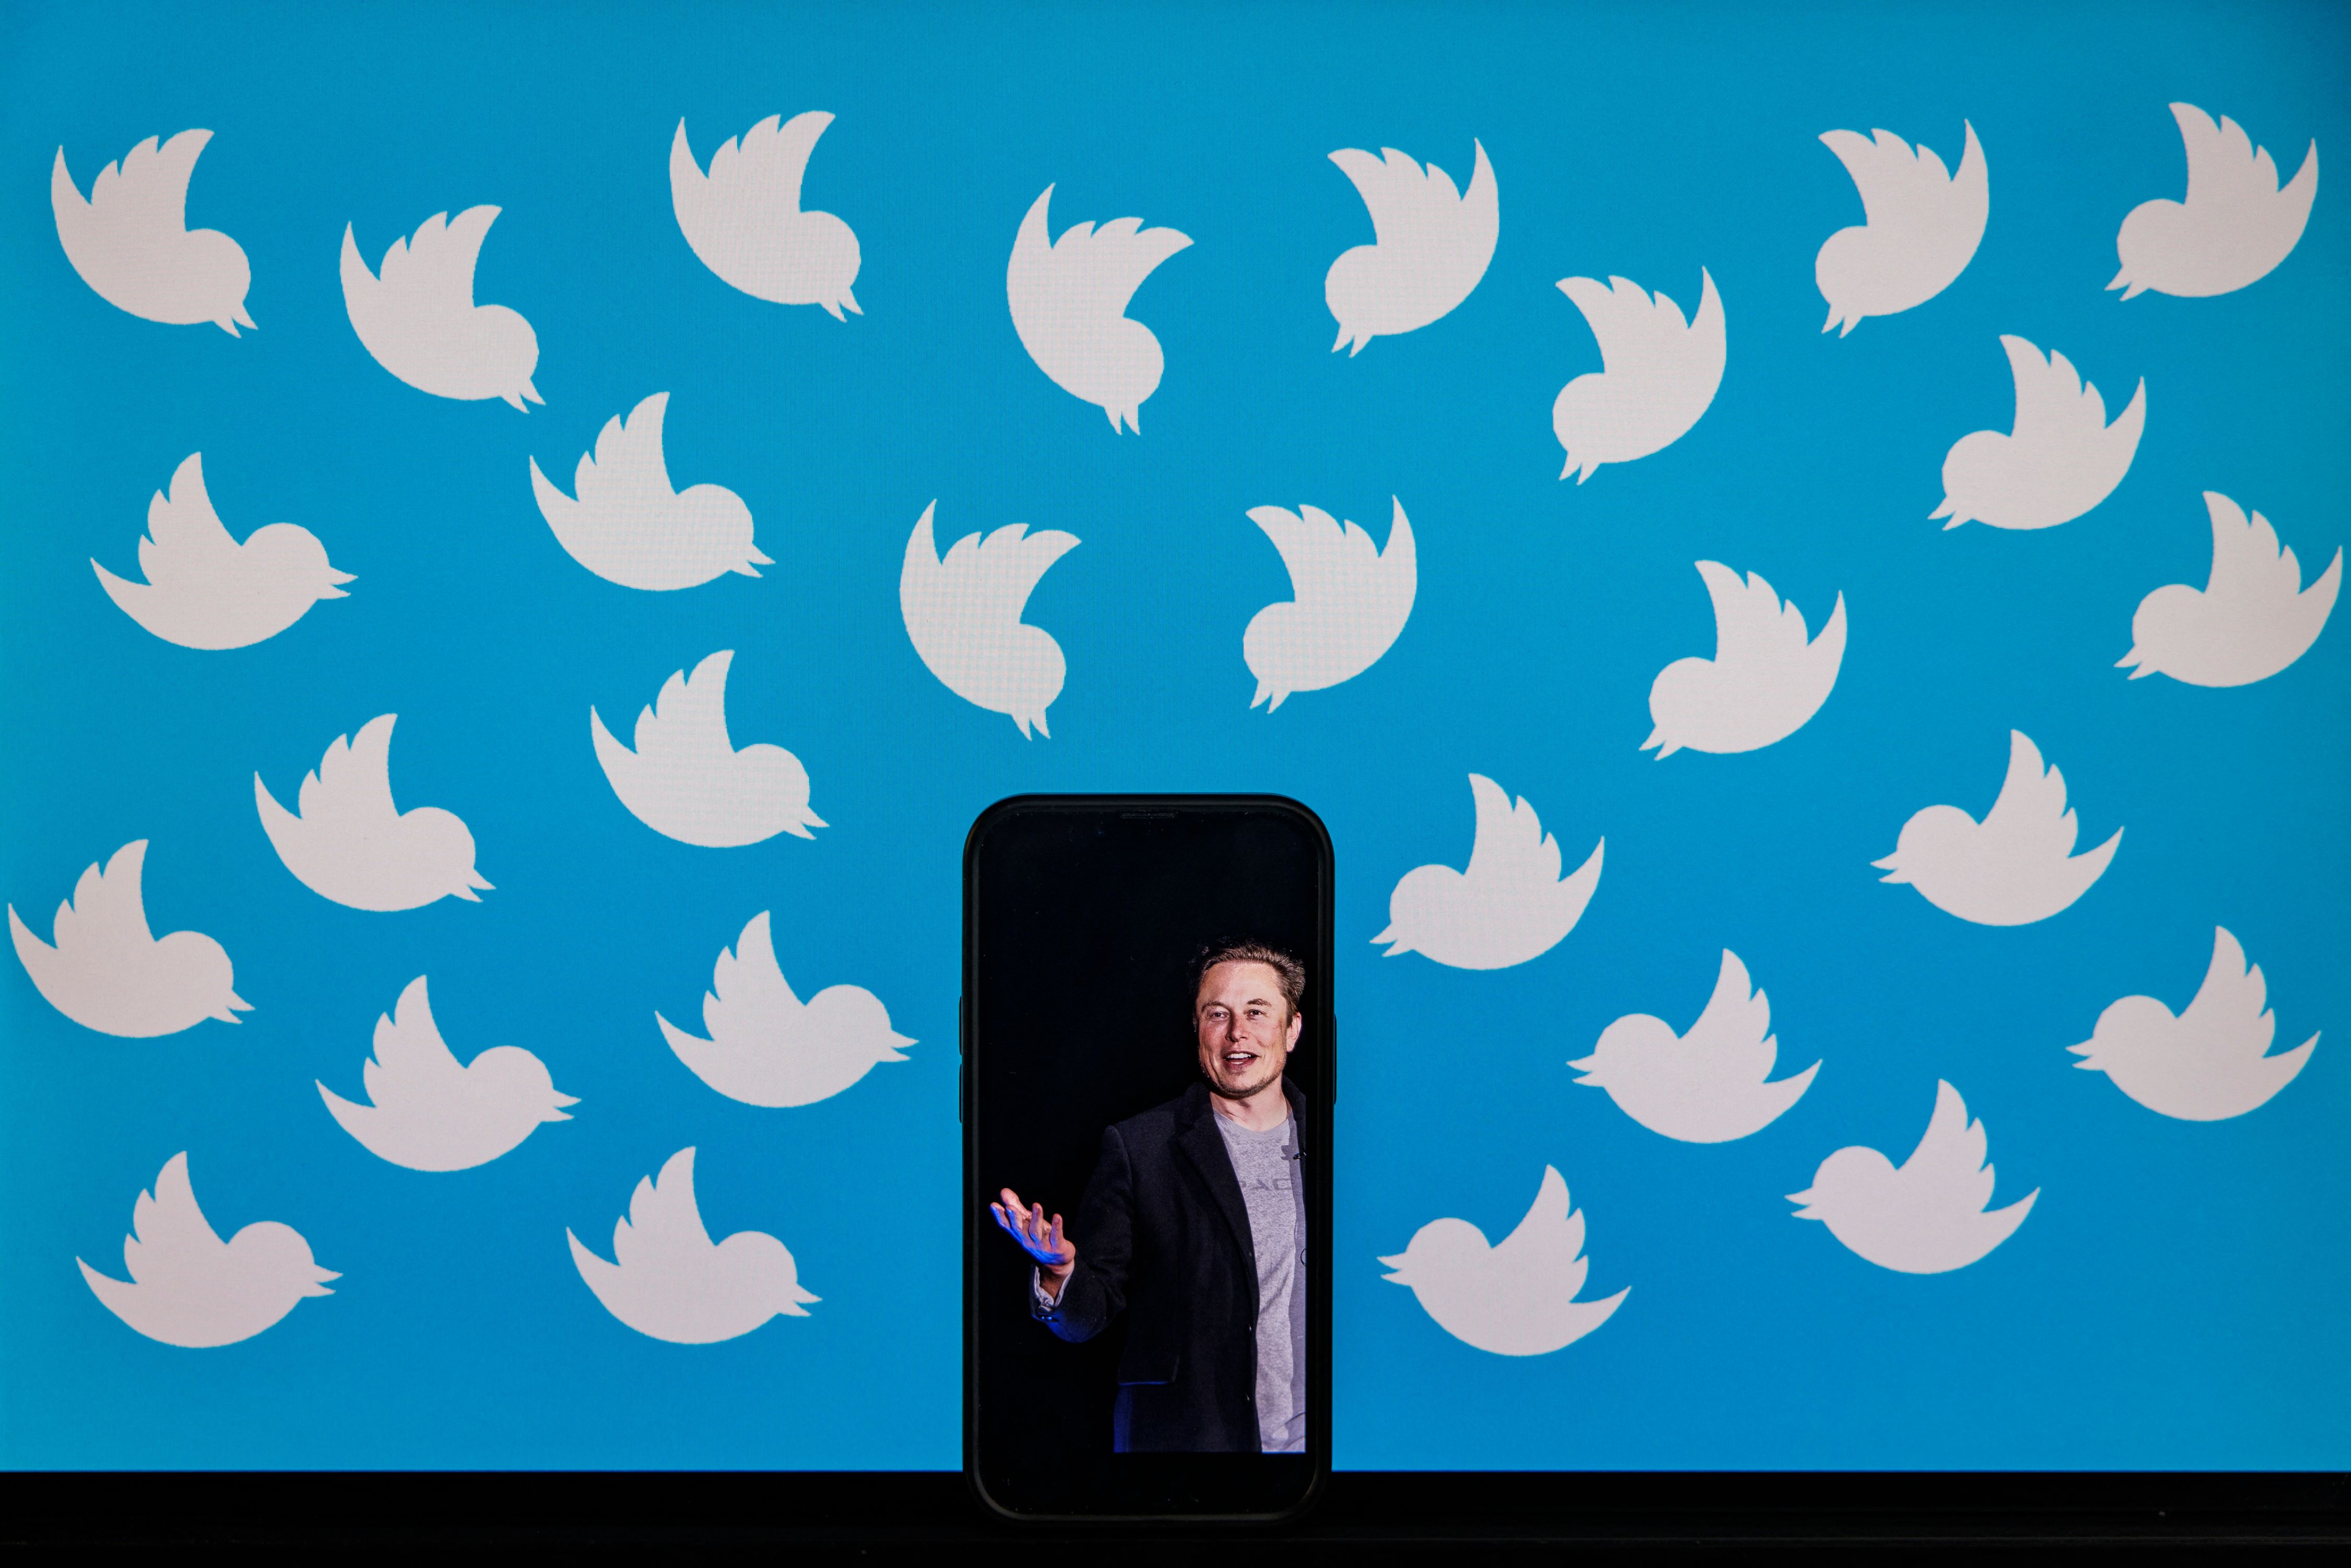 A phone displaying a photo of Elon Musk against a blue background filled with white Twitter bird logos.